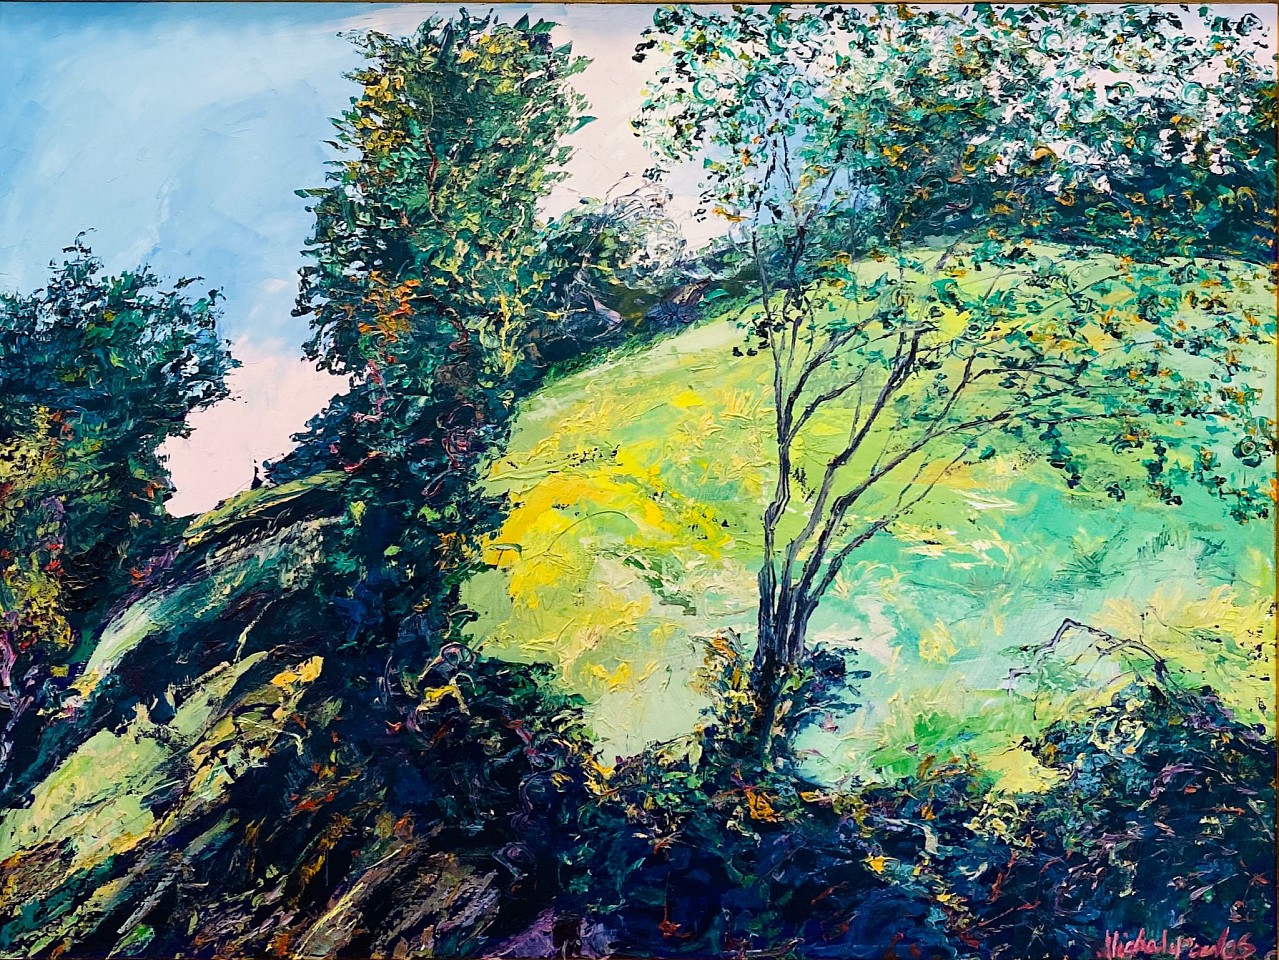 James Michalopoulos, DAY WAIN
Oil on Canvas, 30 X 40
A french landscape with a stunning tree that is the focal point of a winding road through the countryside. 
$12,988